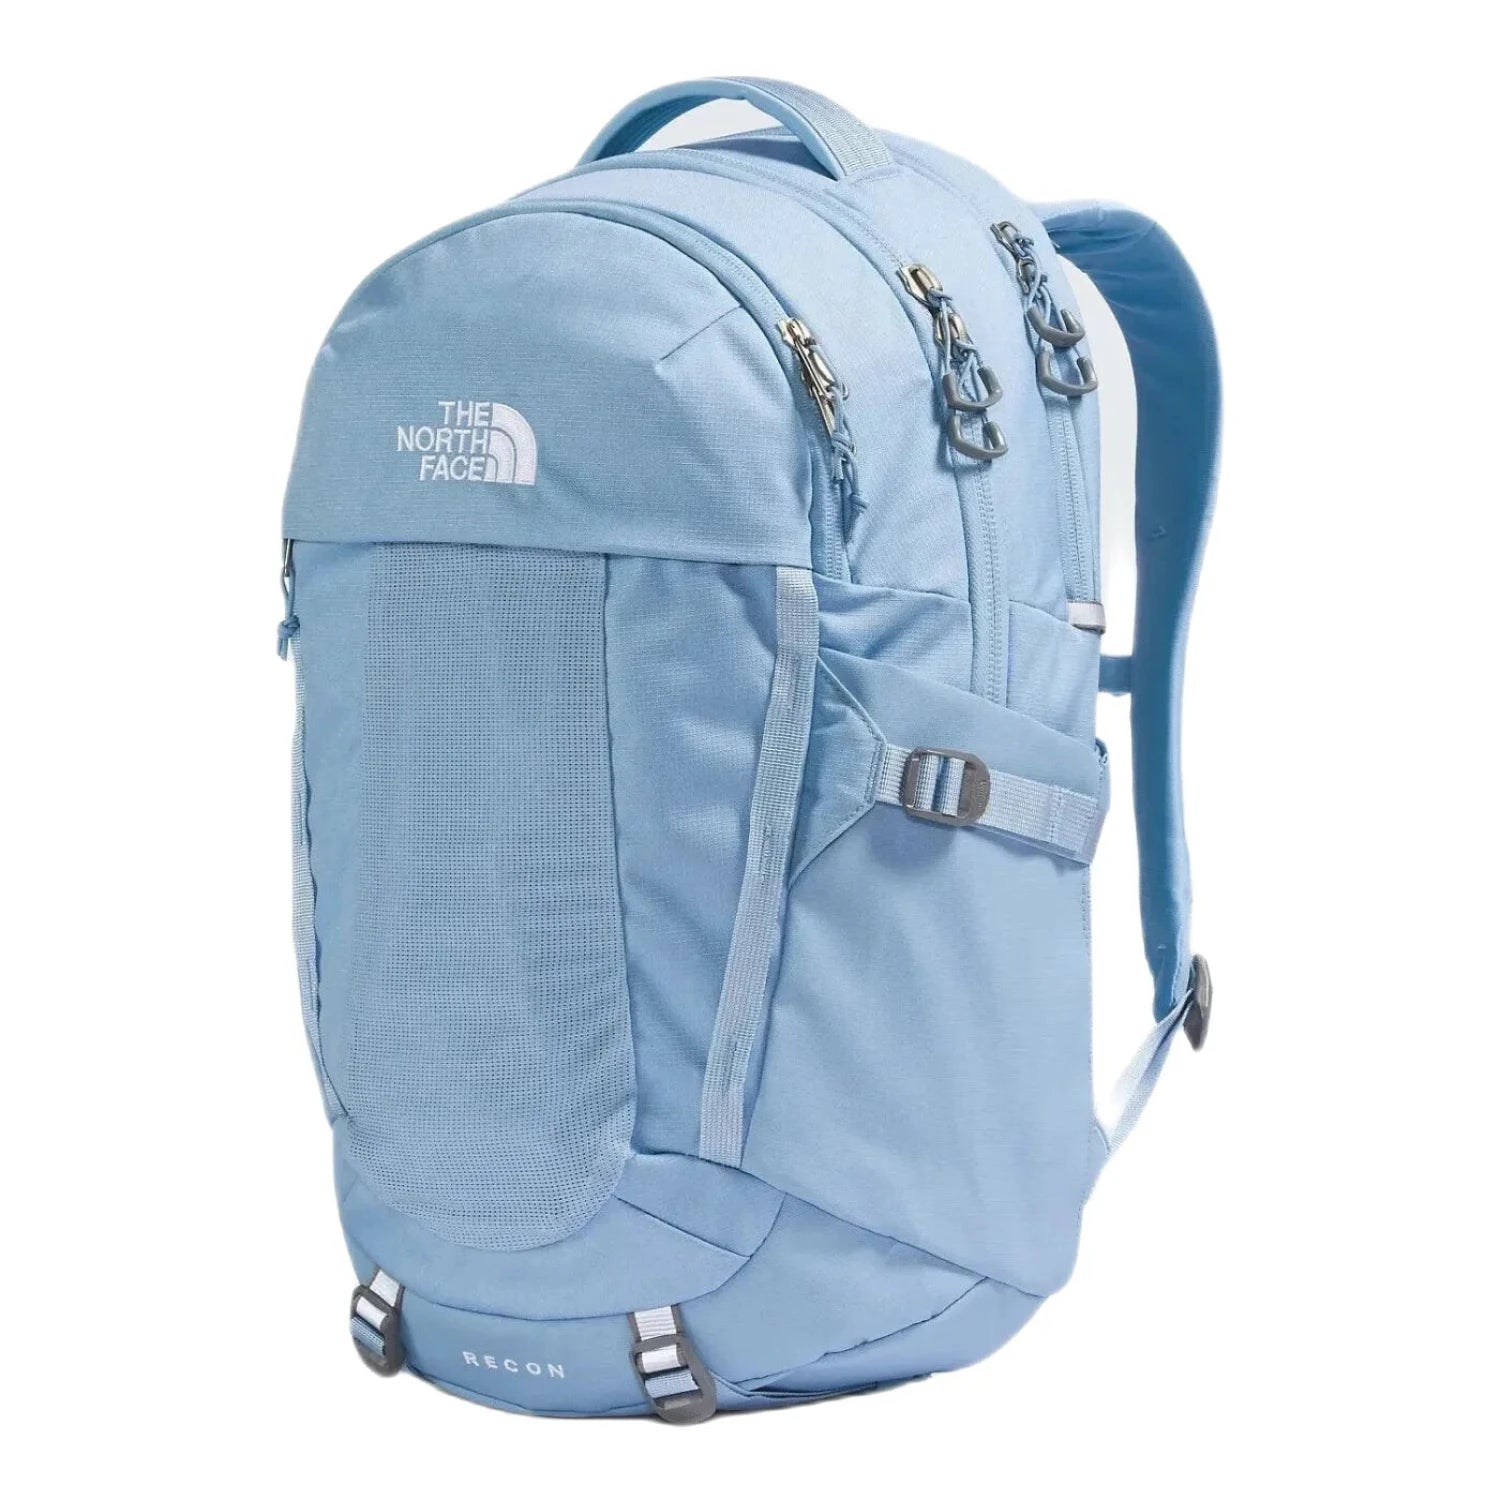 The North Face Women's Recon Backpack Steel Blue Dark Heather Front